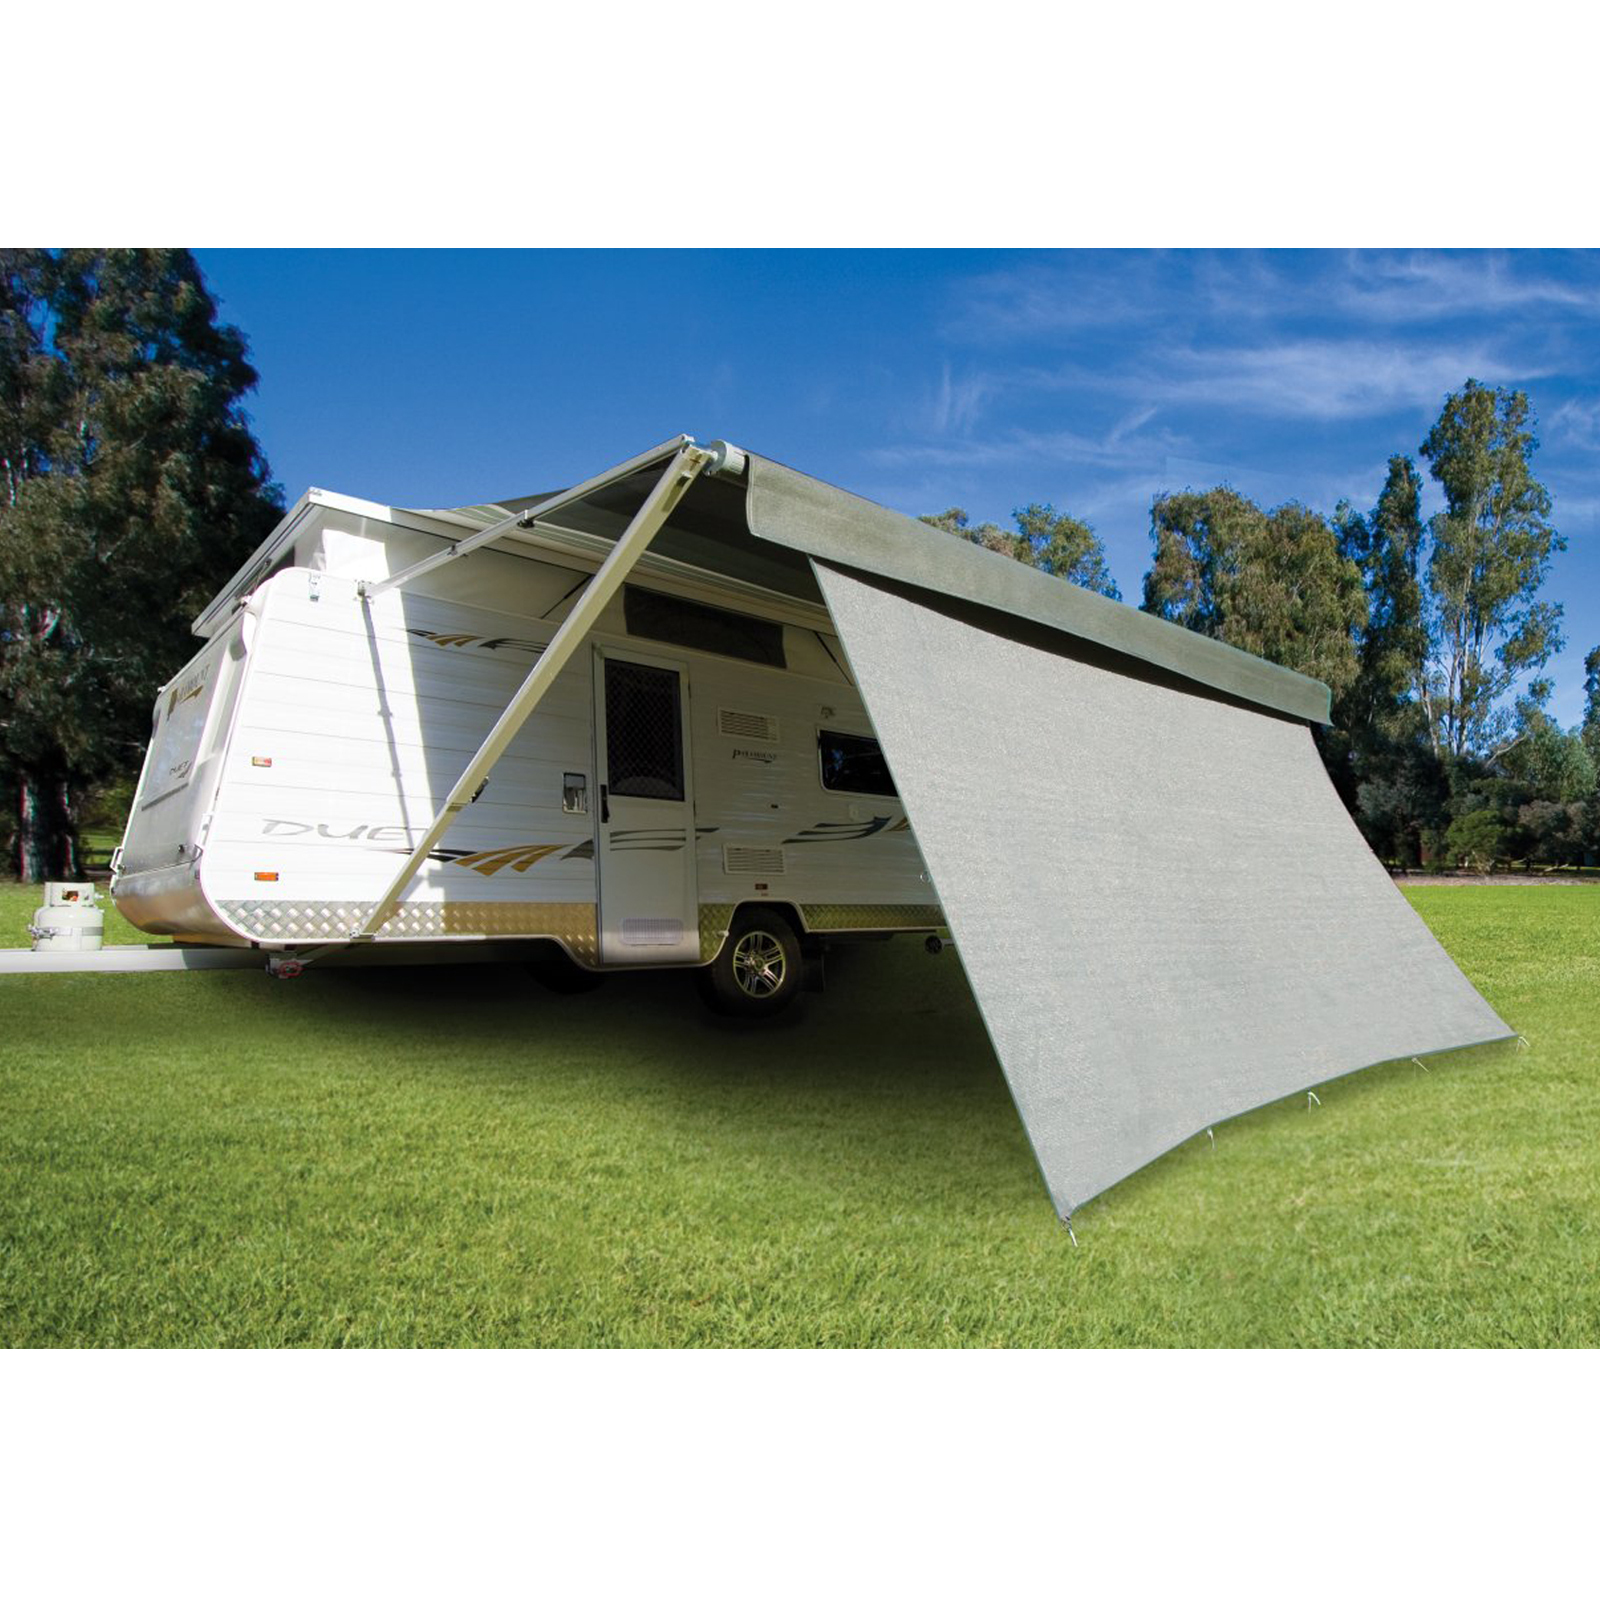 4.0m Coast Caravan Privacy Sunscreen Shade Cover for 14feet Roll-out Awning